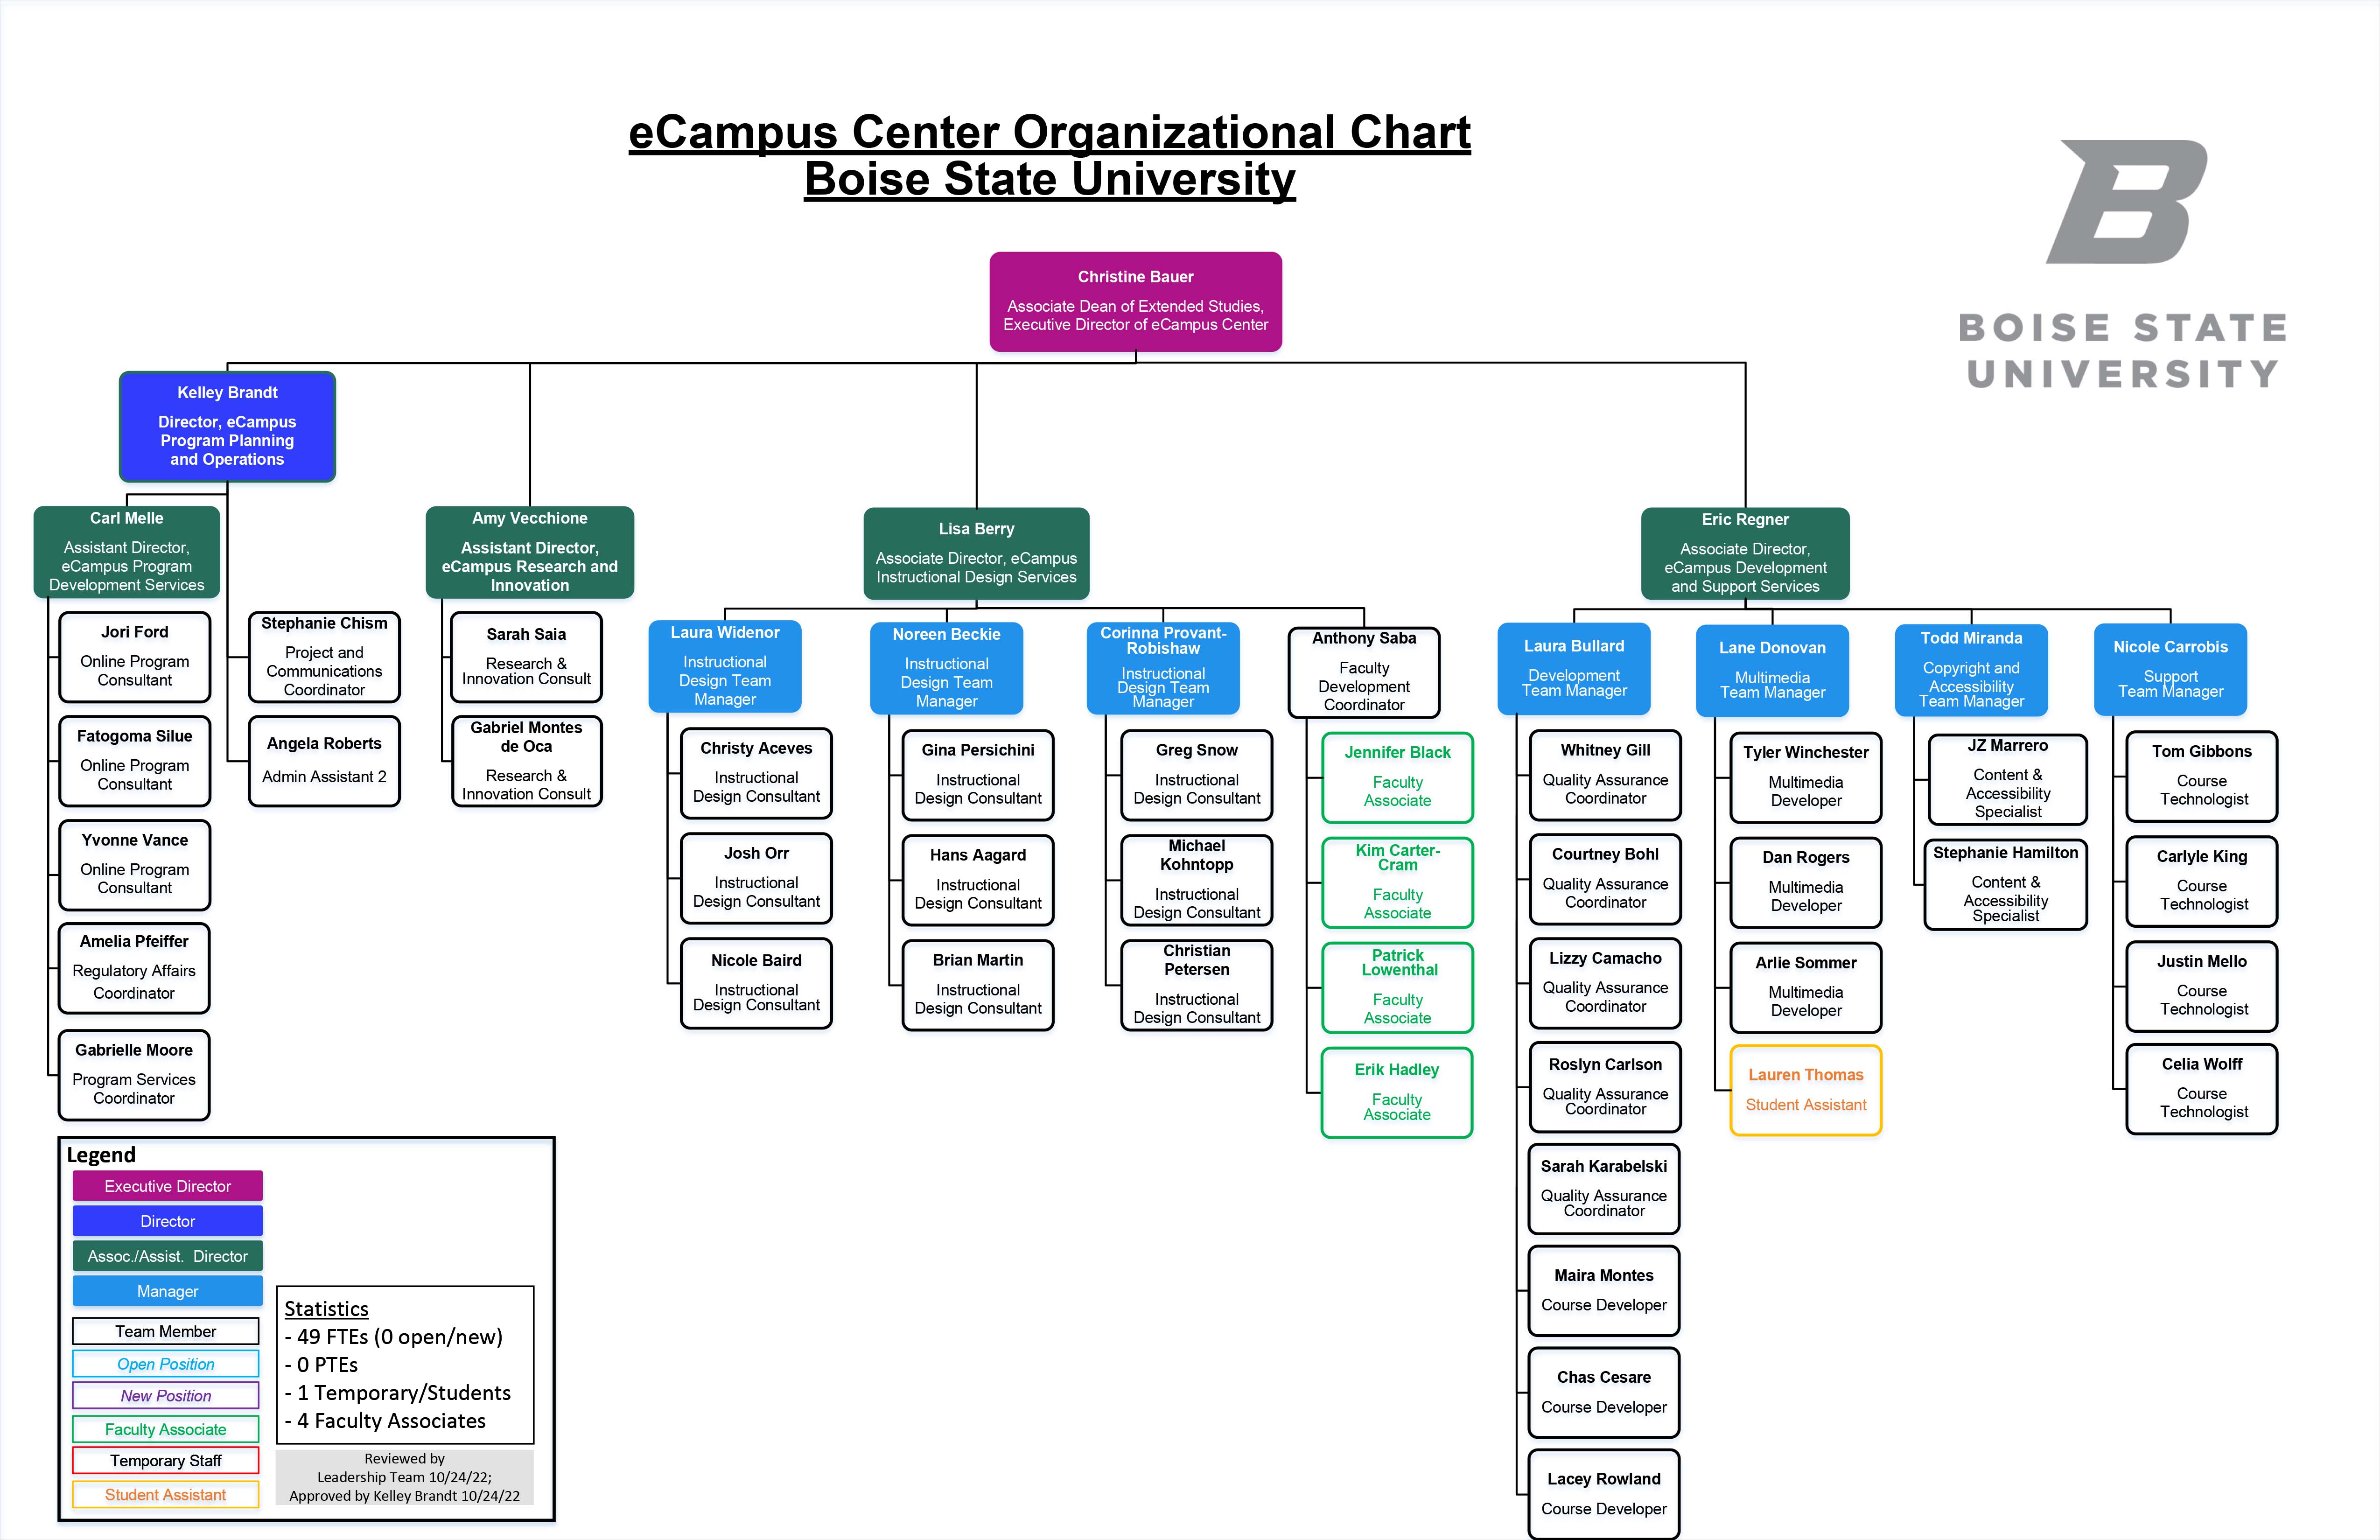 eCampus Center Organizational Chart, see page for link to text description